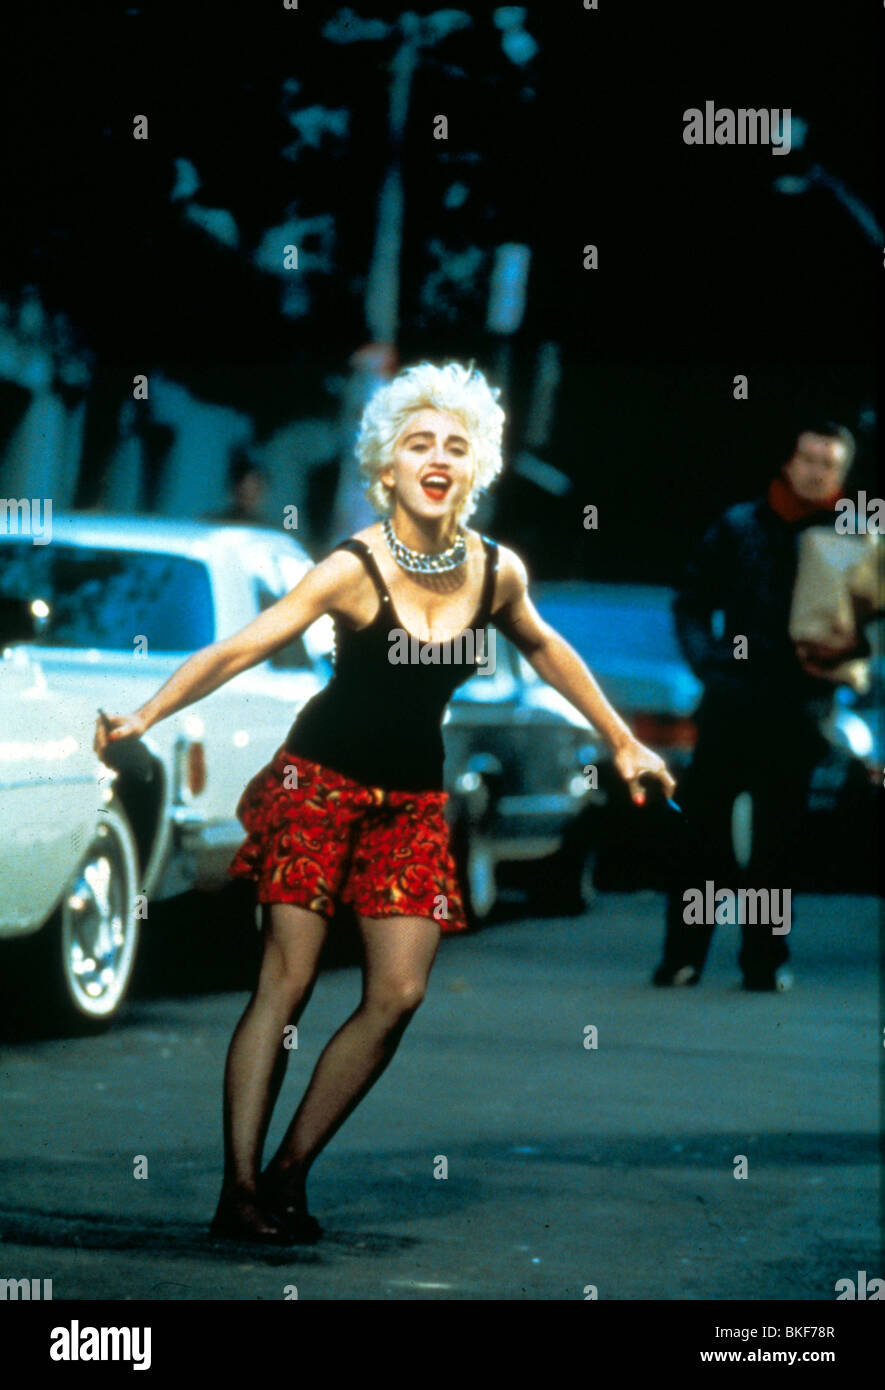 WHO'S THAT GIRL -1987 MADONNA Stock Photo